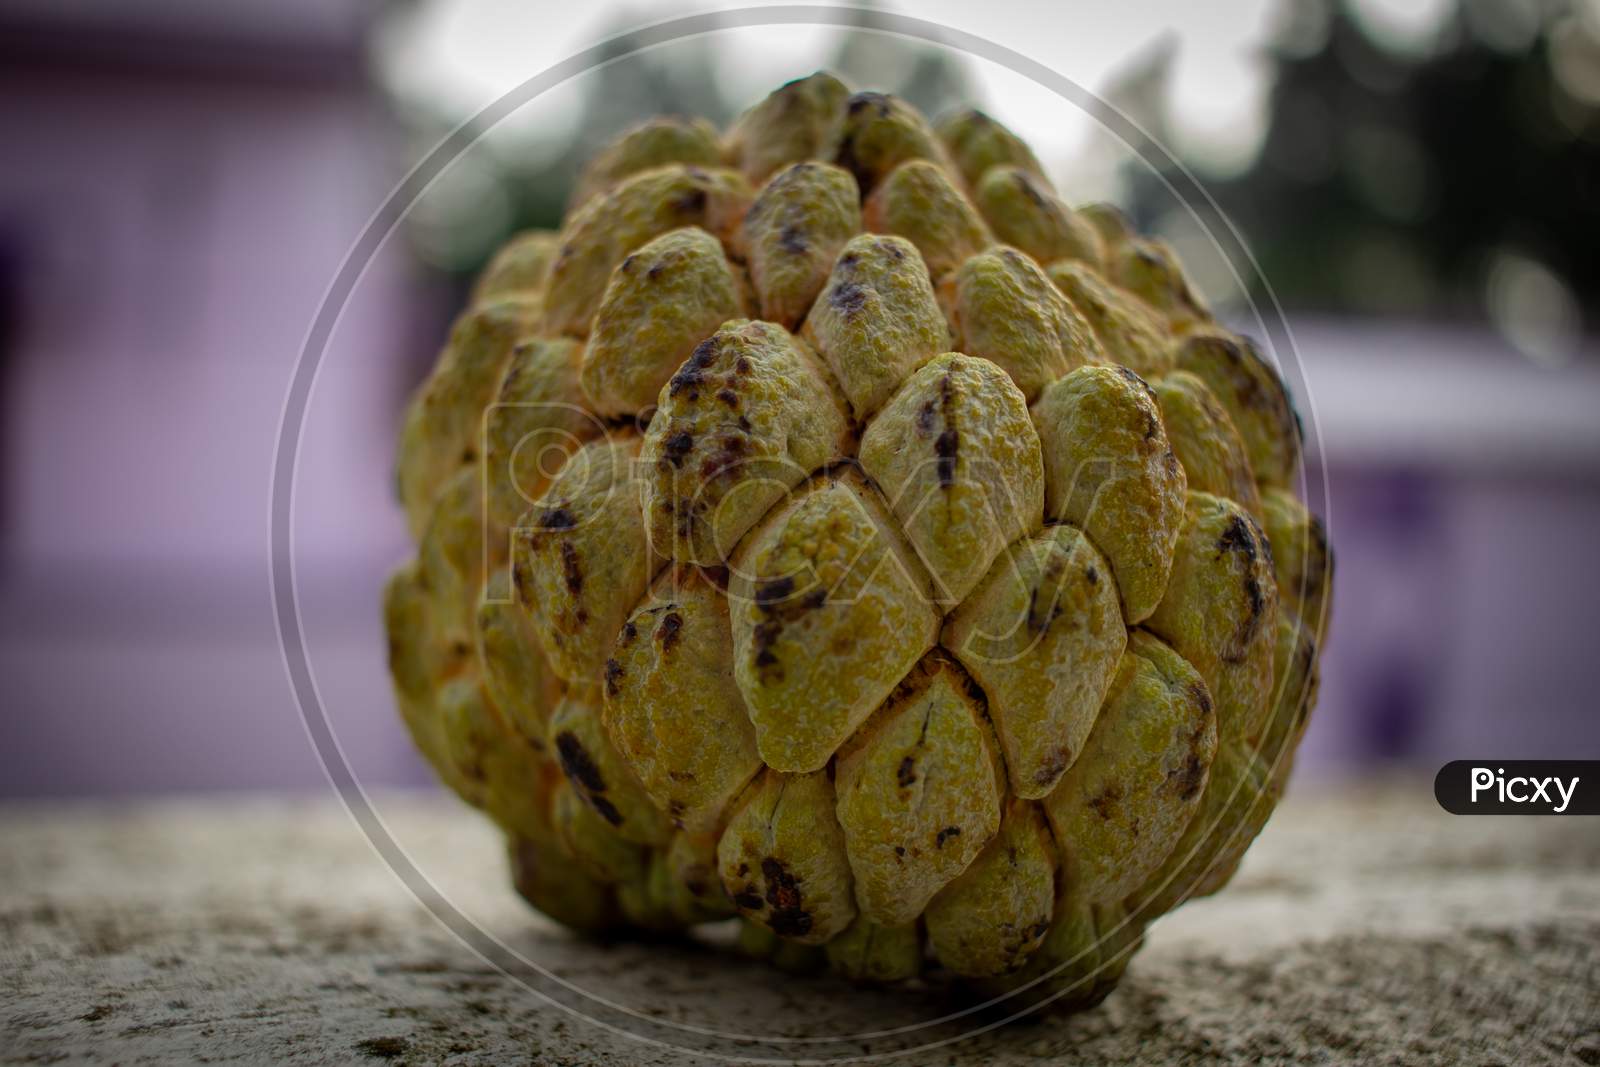 View Of Single Custard Apple Fruit Which Is Rich In Nutrients And Minerals.